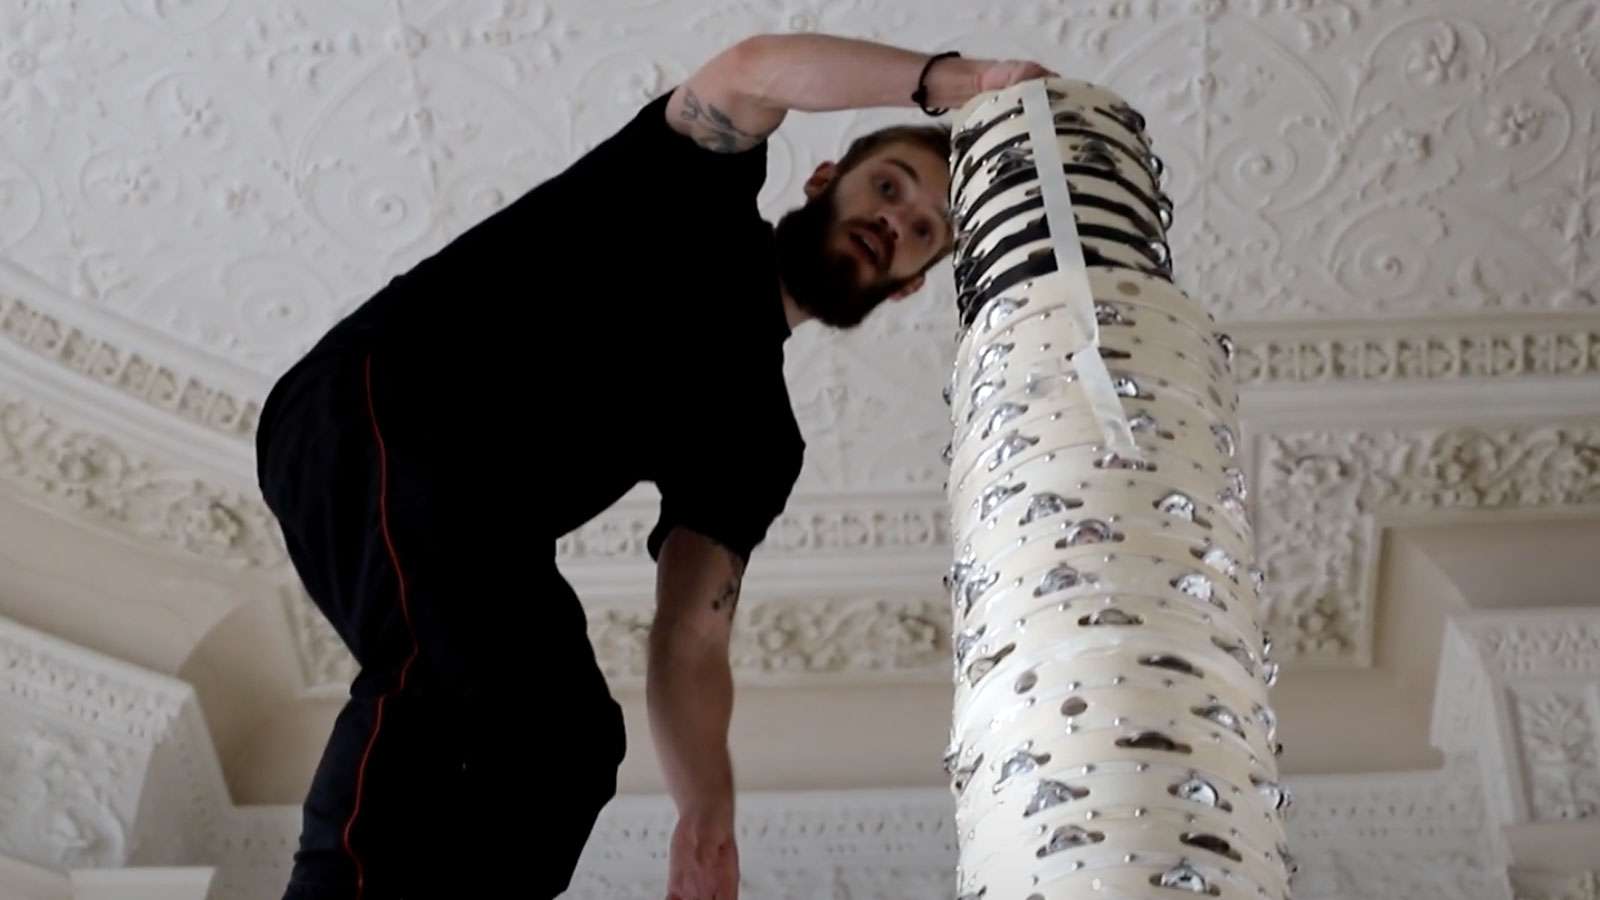 pewdiepie with tambourine tower